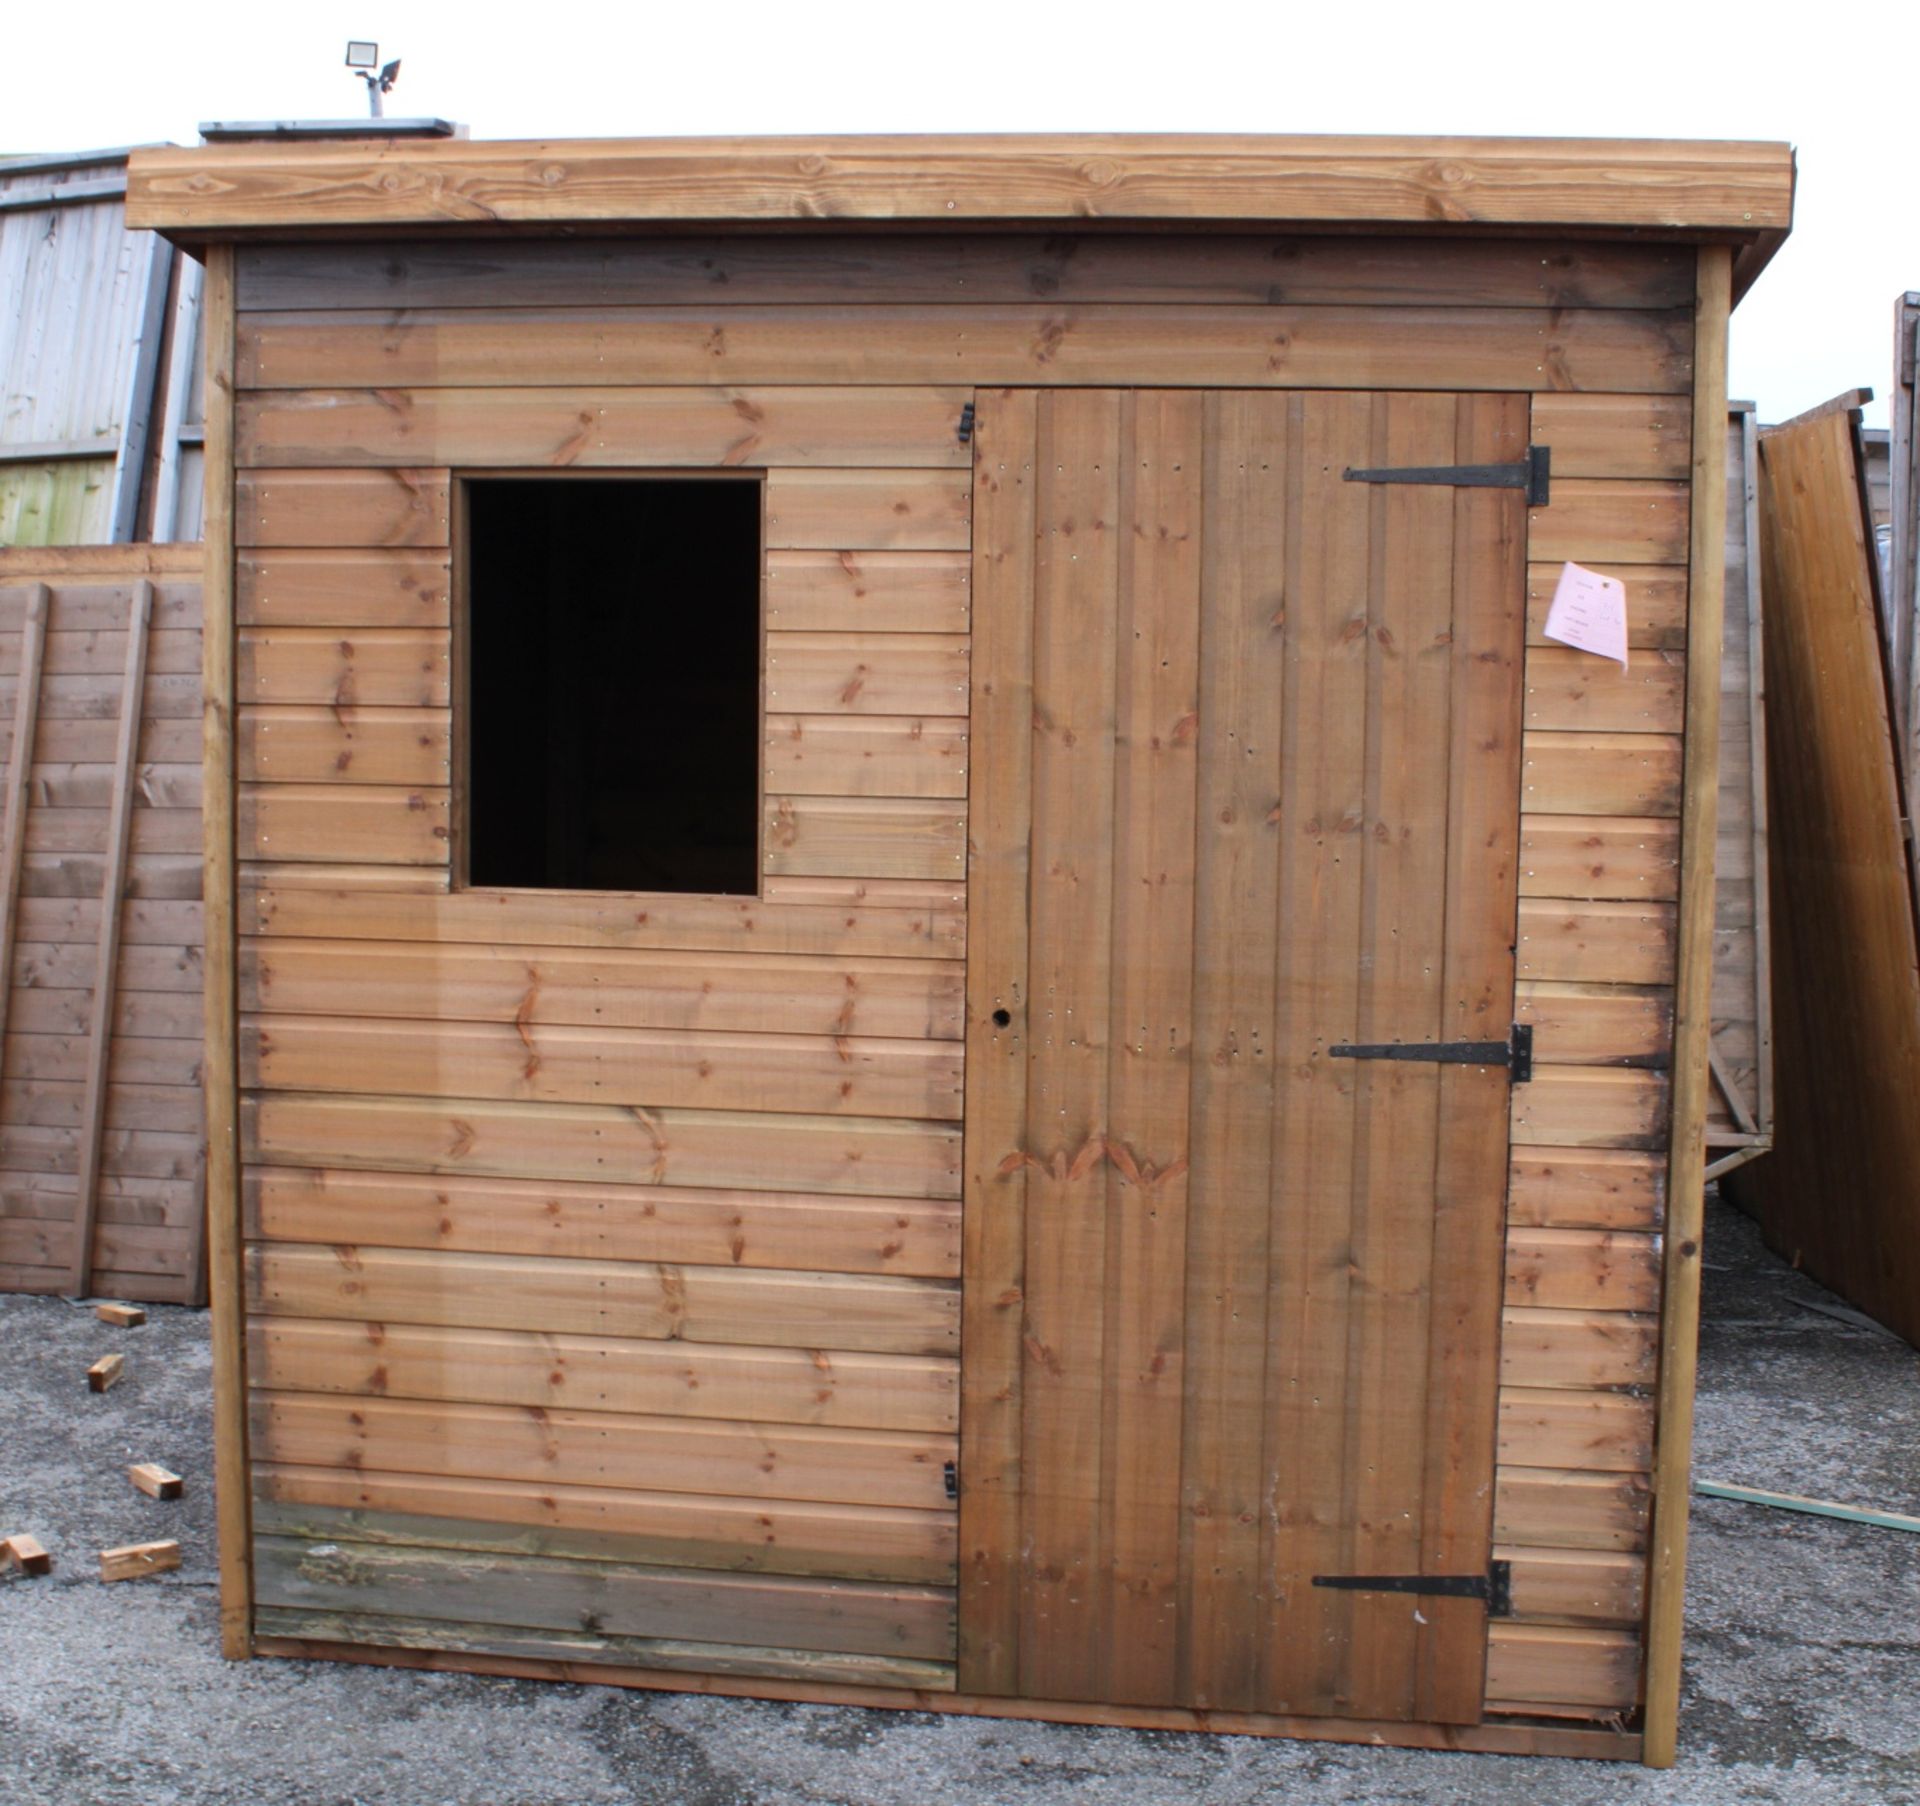 14 9/8 7x5 superior height pent shed, Standard 16mm Nominal Cladding £ RRP960 - Image 3 of 3